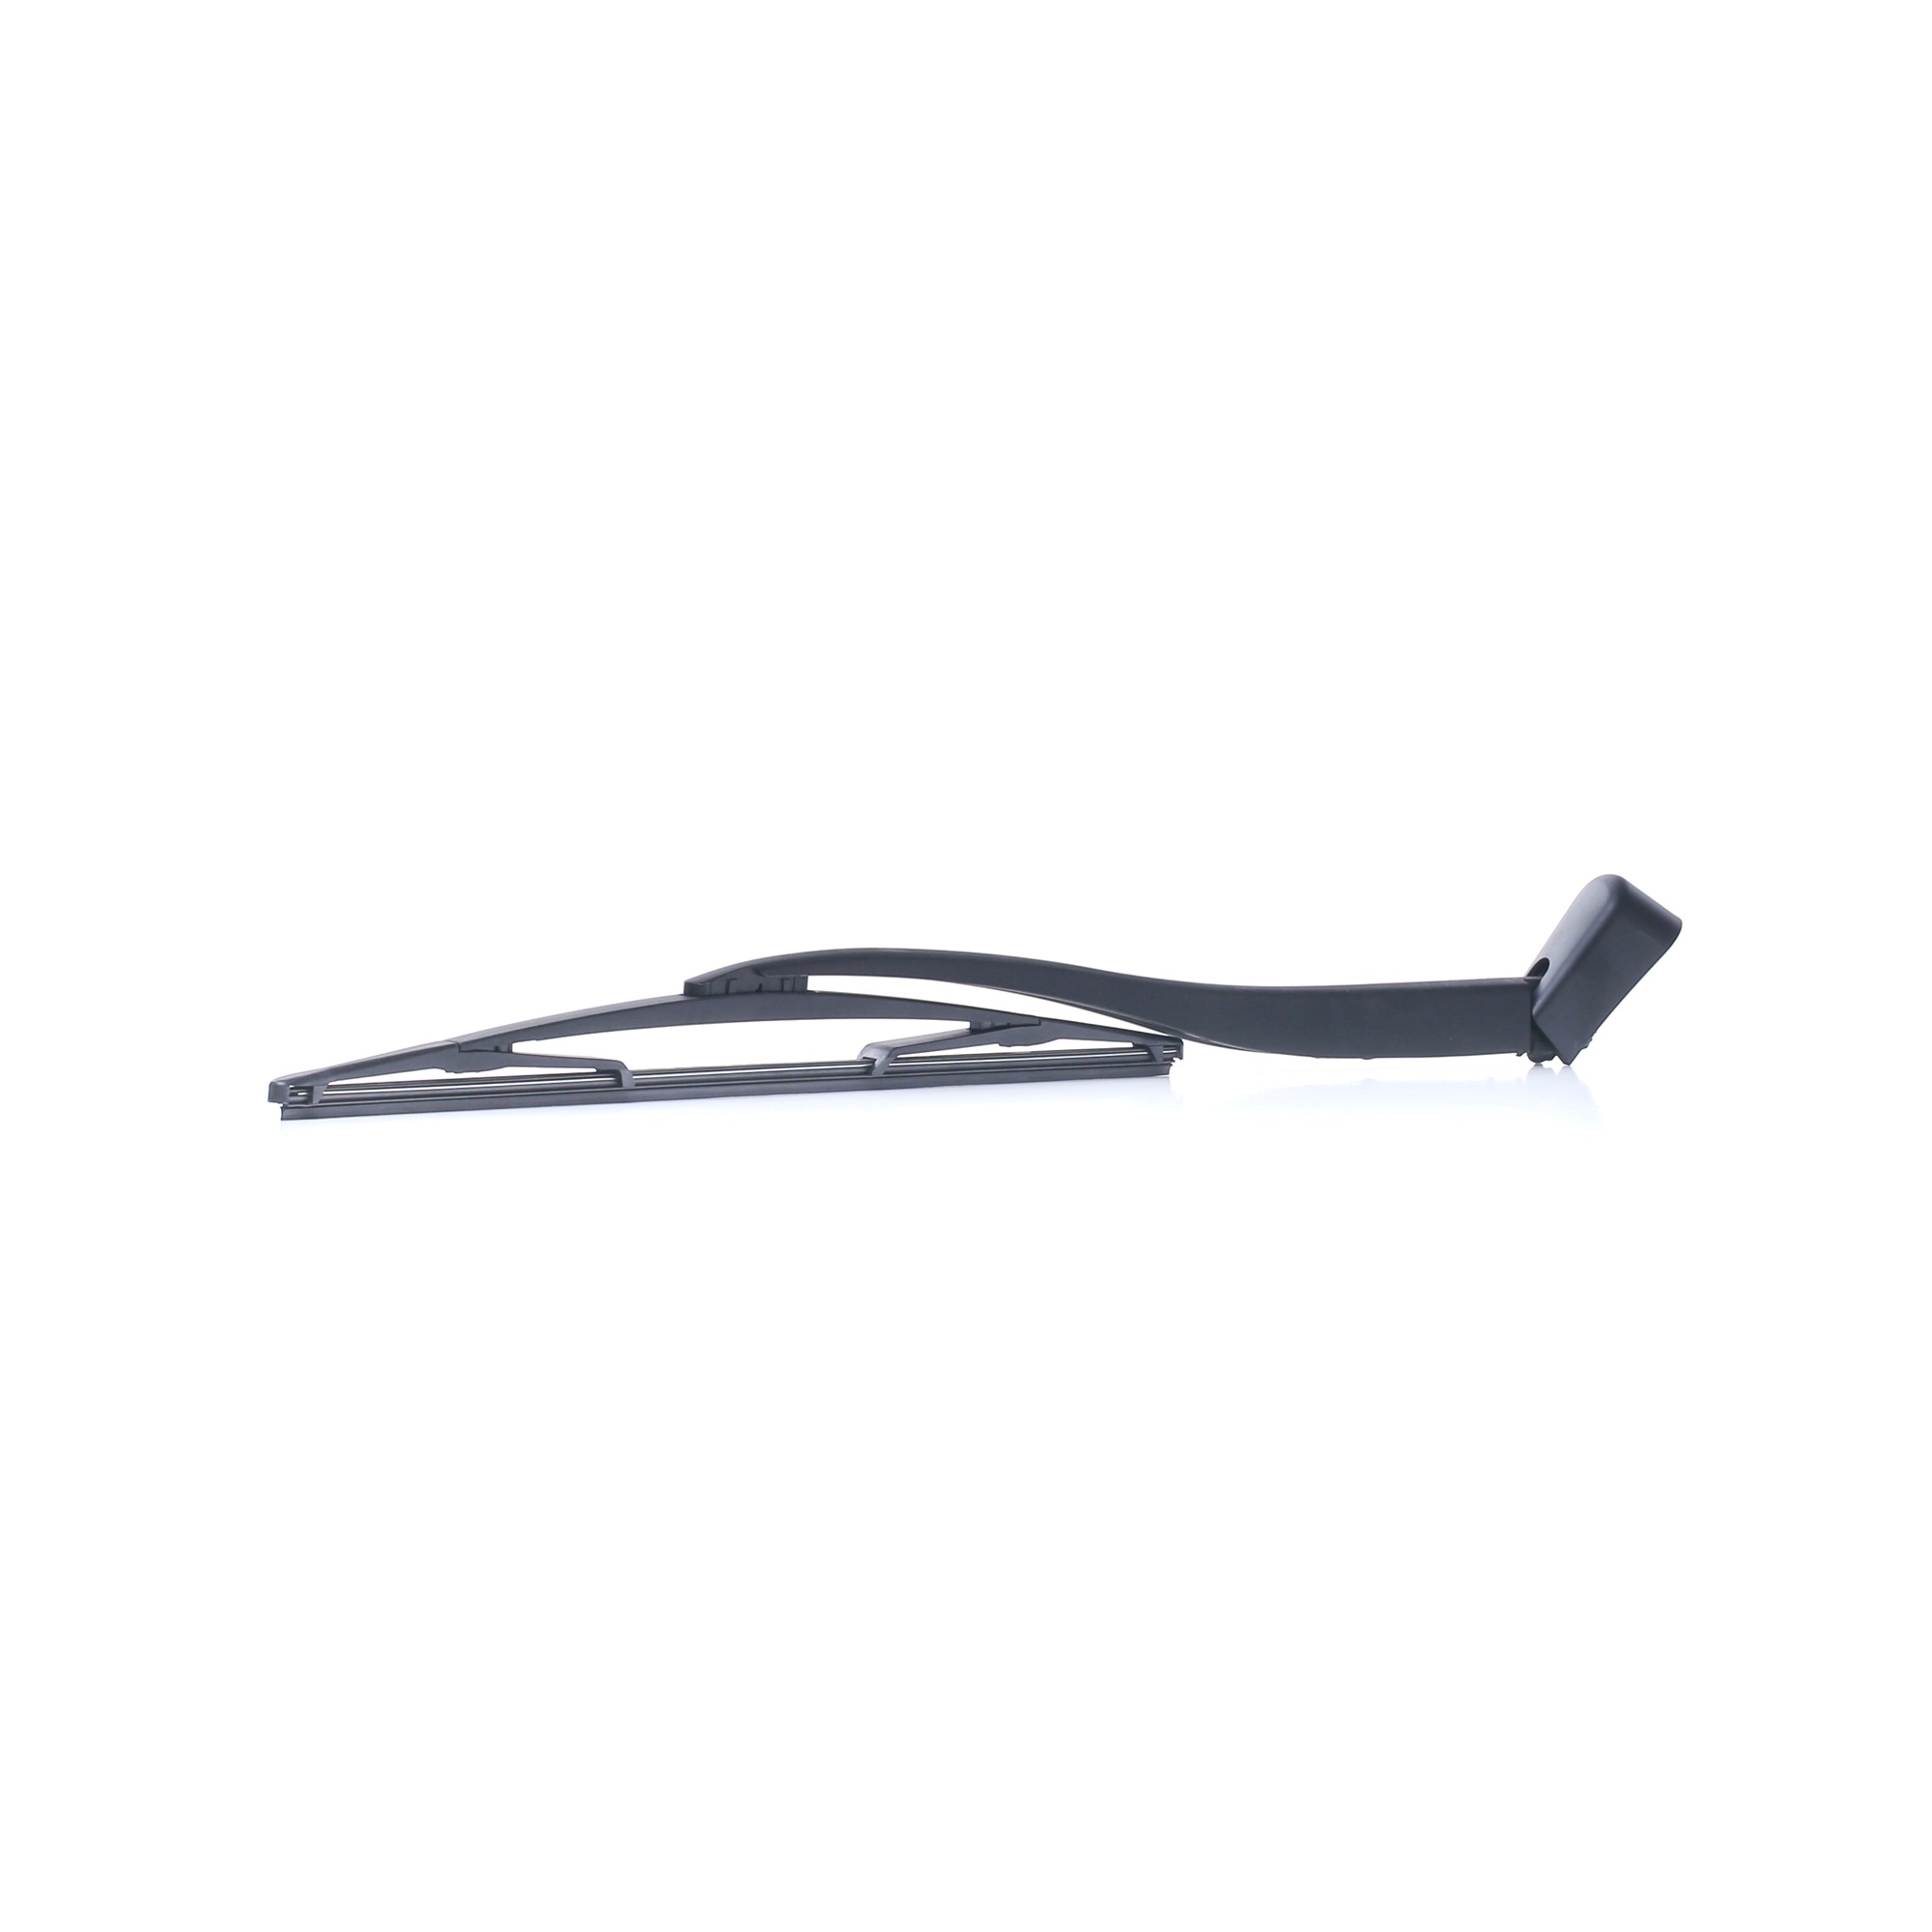 METZGER 2190269 Wiper Arm, windscreen washer Rear, with integrated wiper blade, with cap